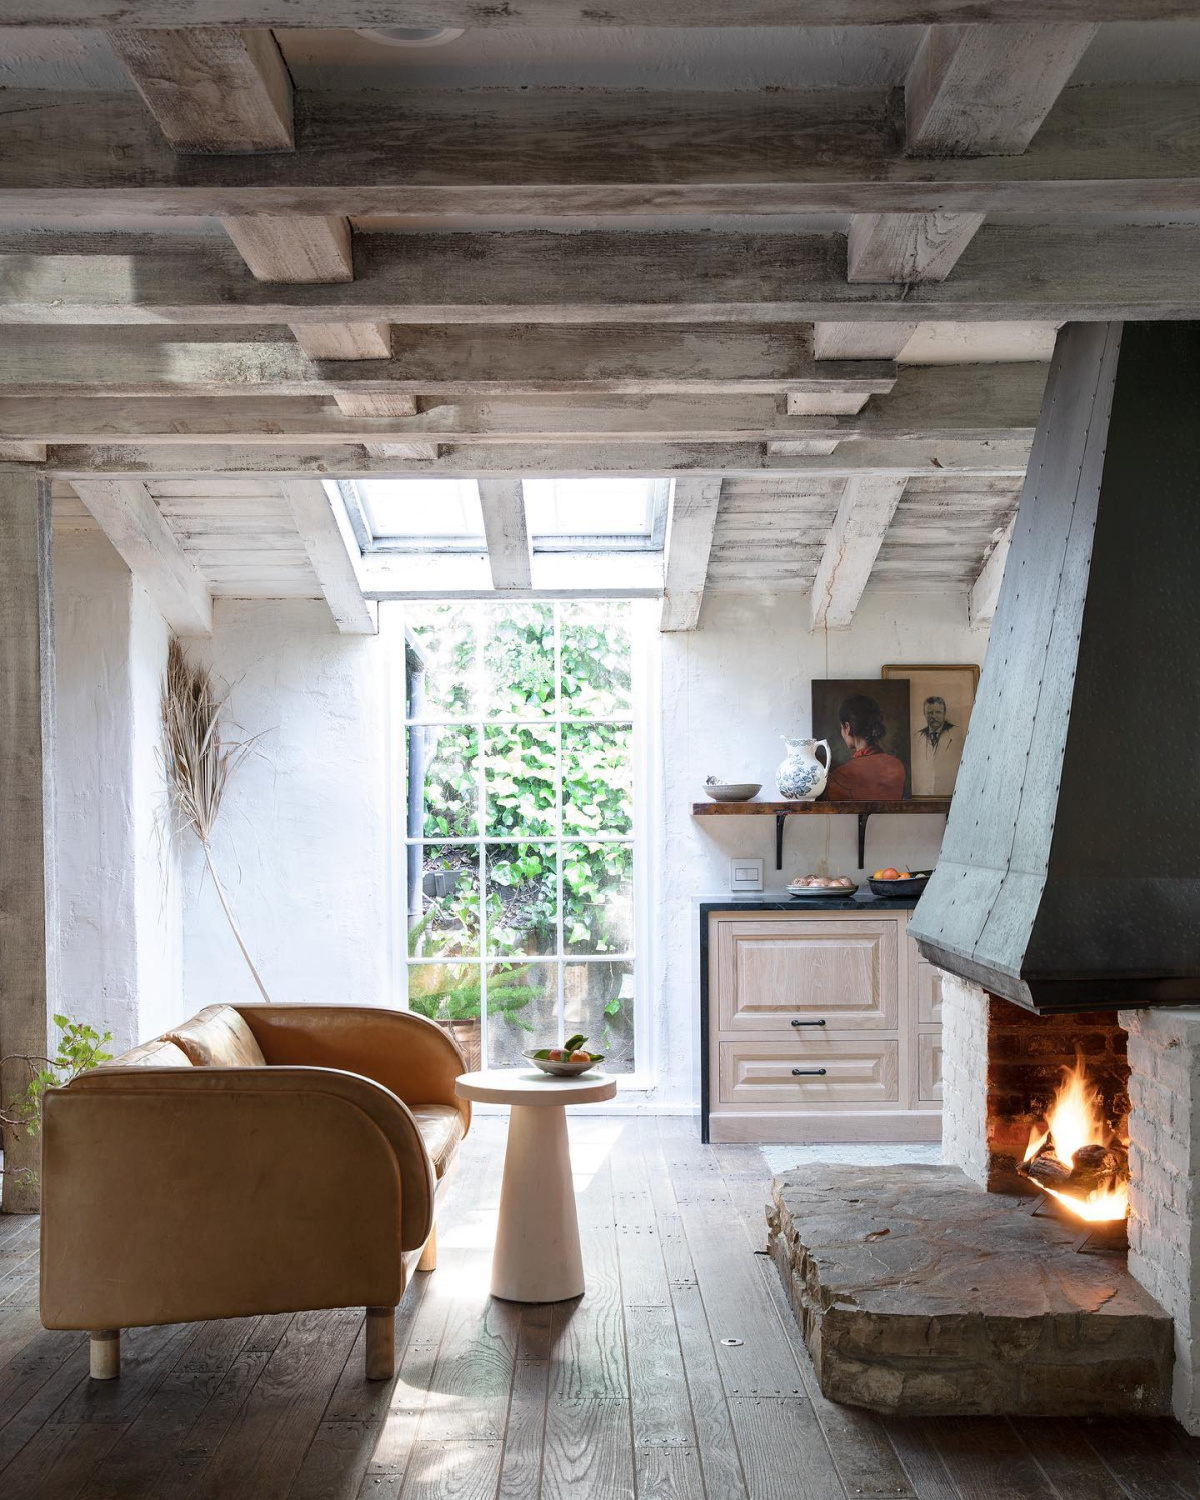 Leanne Ford designed cozy rustic modern minimal interior with fireplace and wood ceiling. #leanneford #cozymodernrustic #cozyinteriors